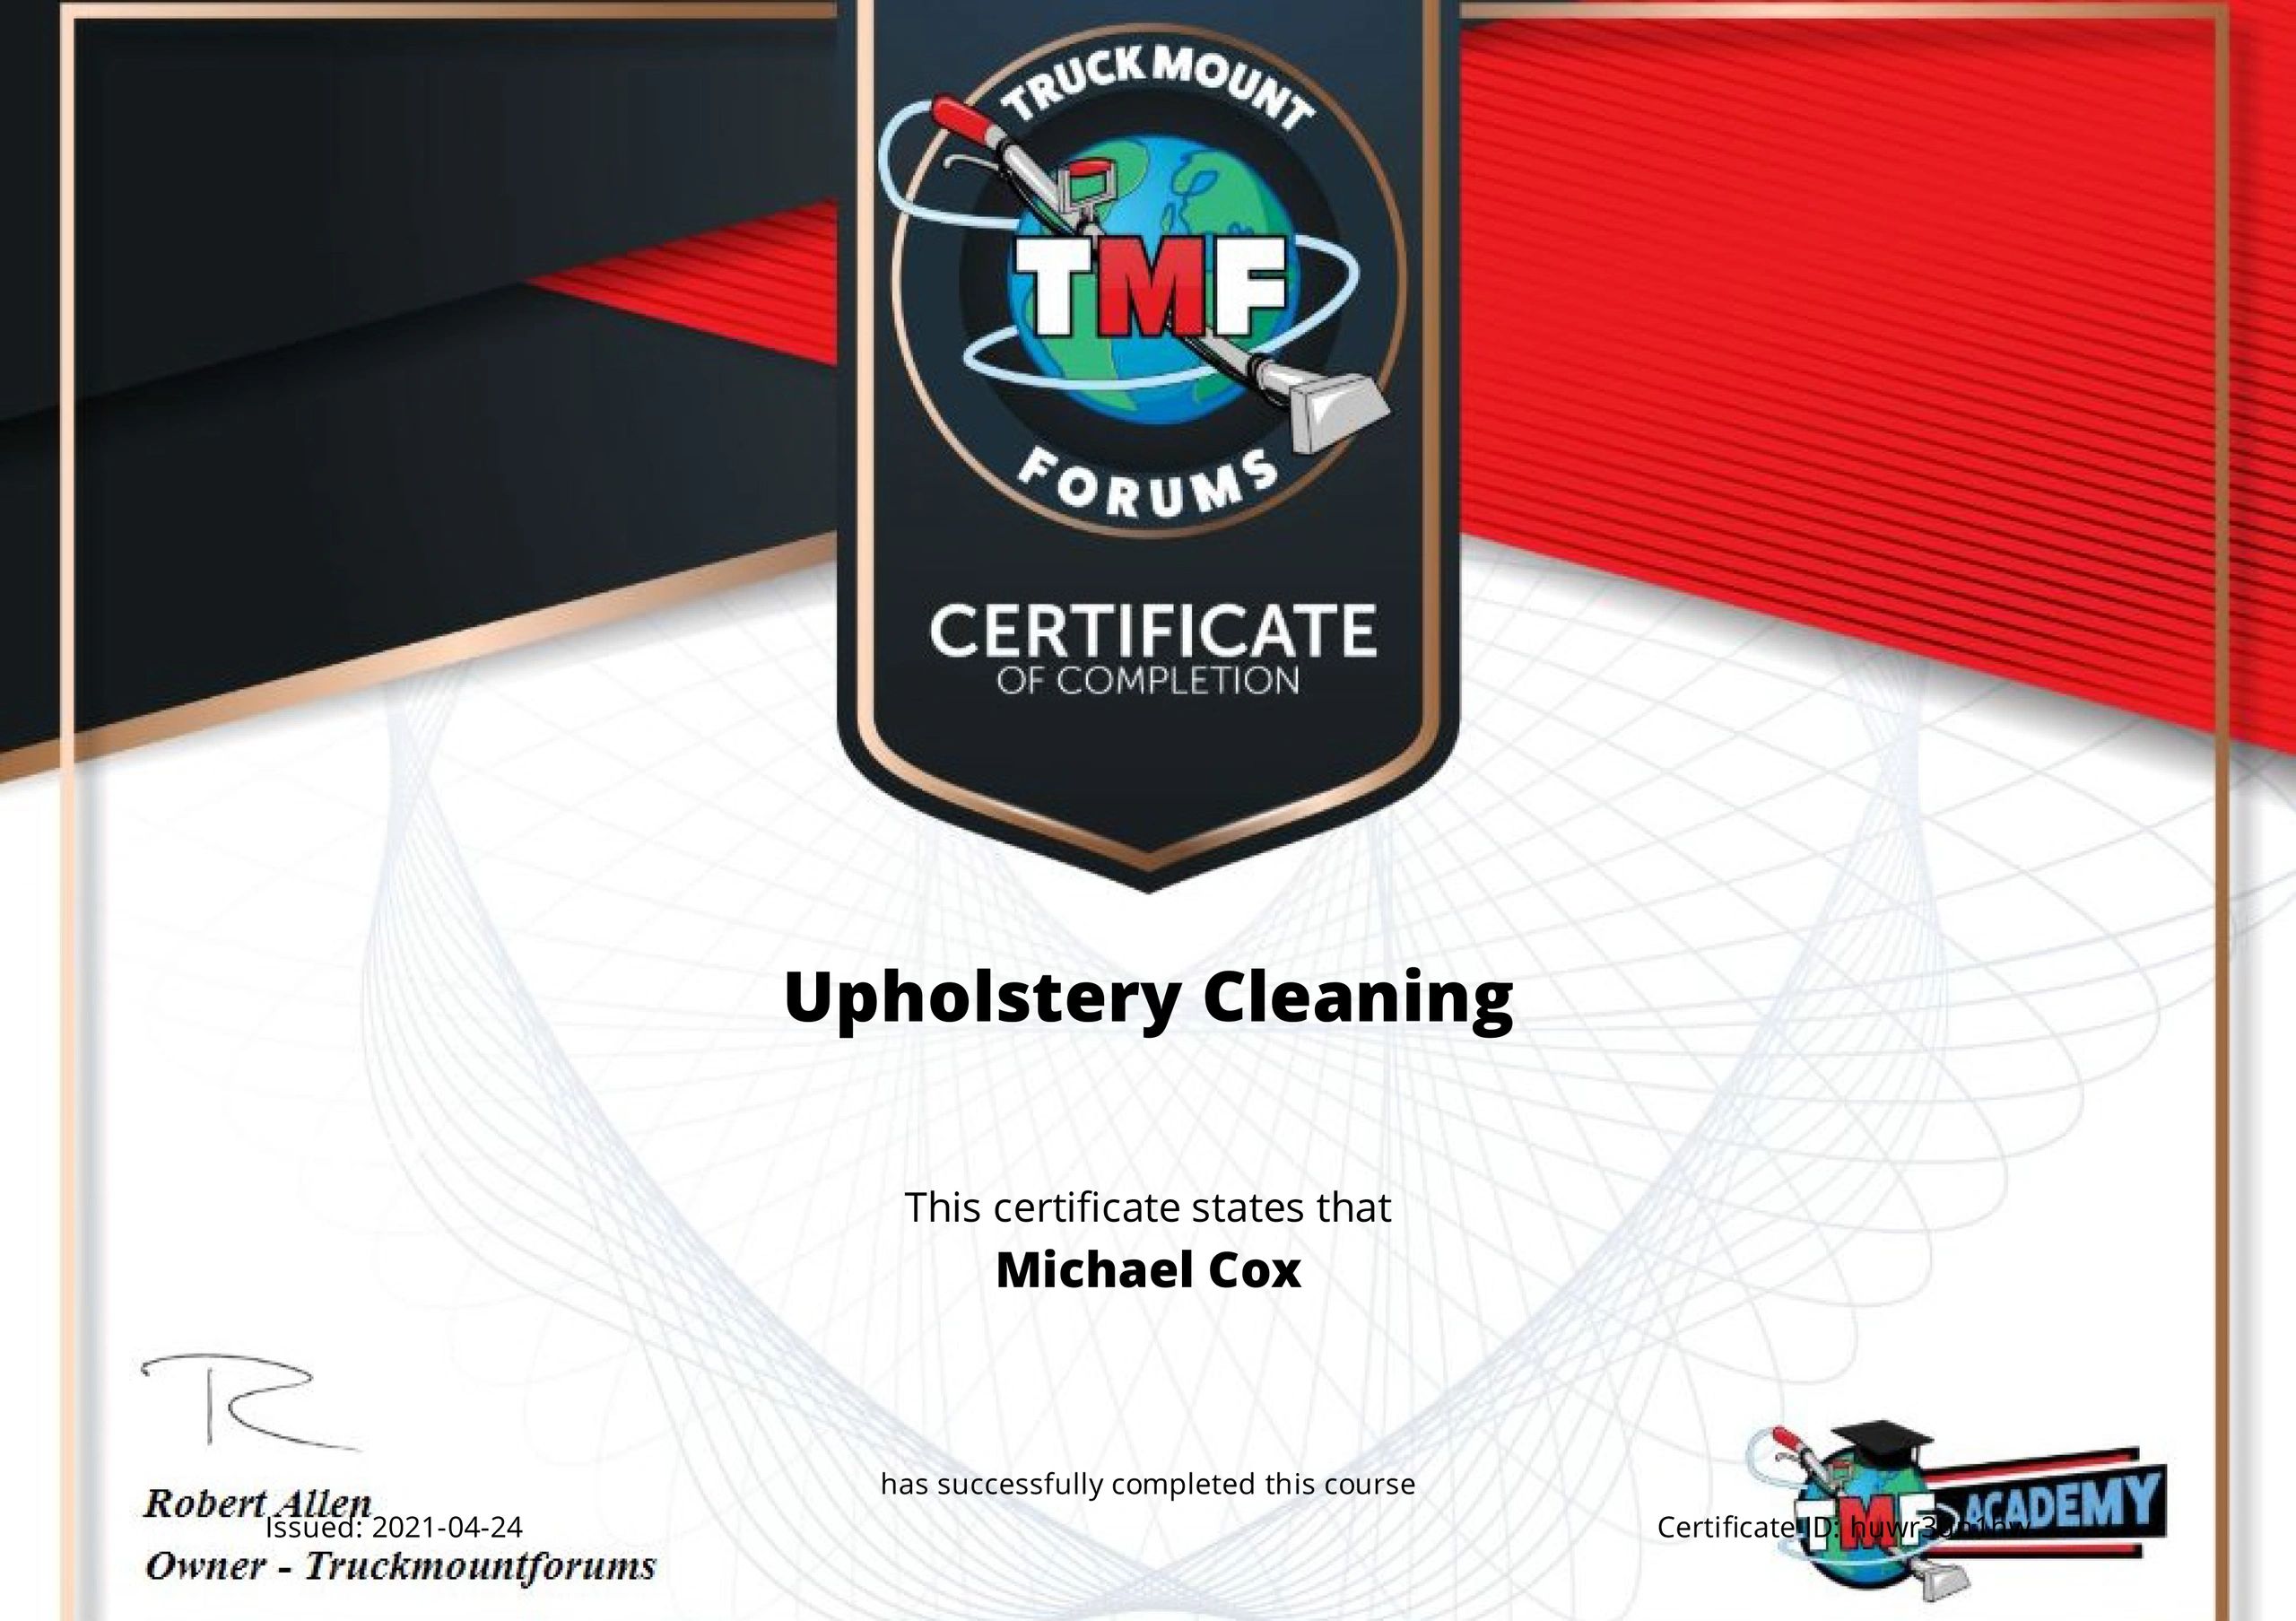 Certification in Upholstery Cleaning